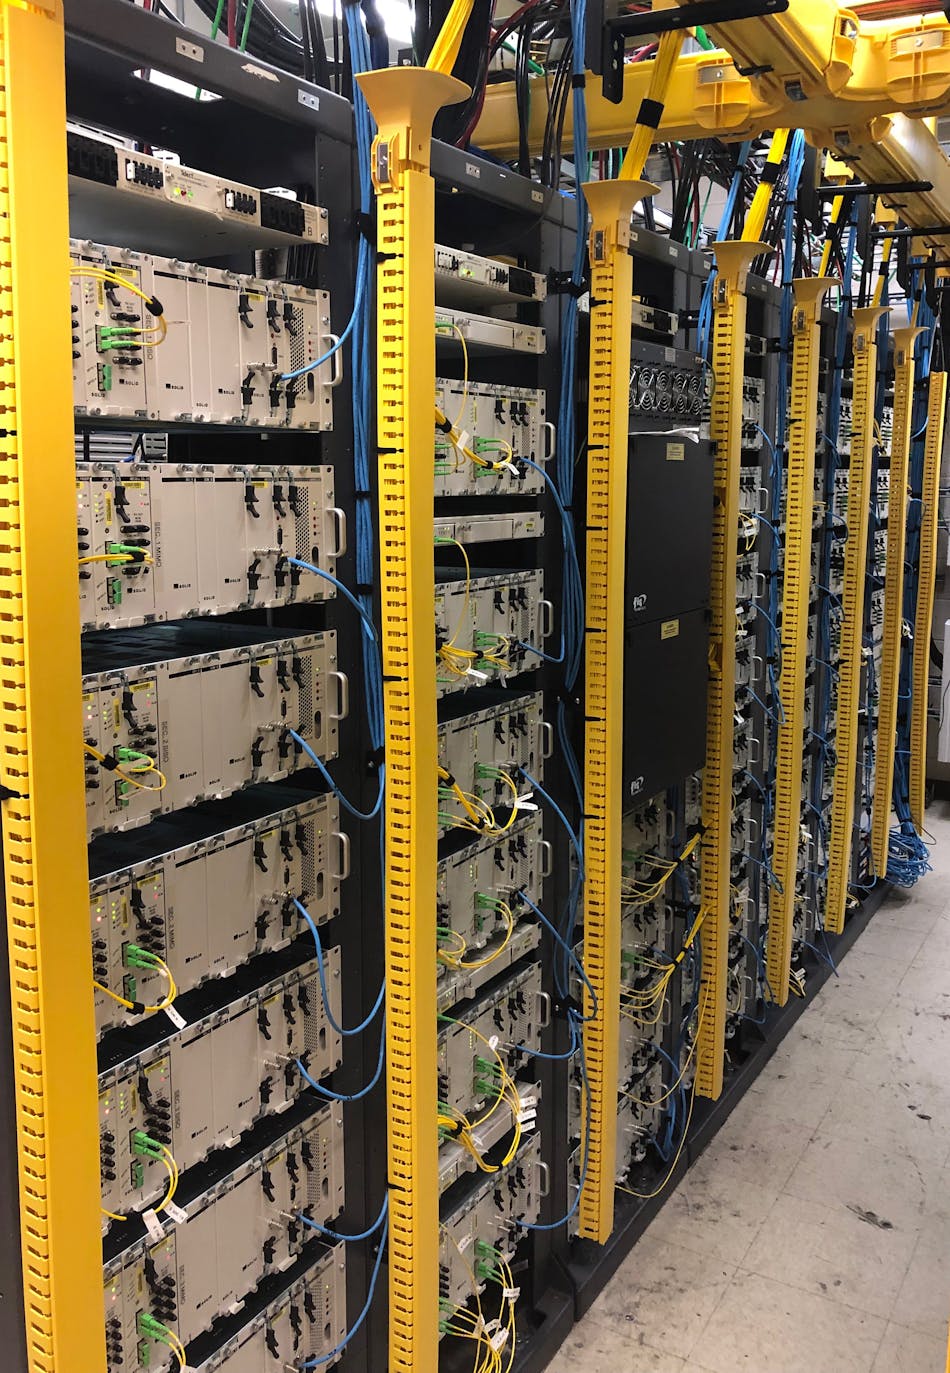 Legacy in-building DAS installations, such as this deployment in a professional sports stadium, will need to be upgraded to support new mid-band 5G frequencies. (Photo Courtesy of SOLiD Americas)